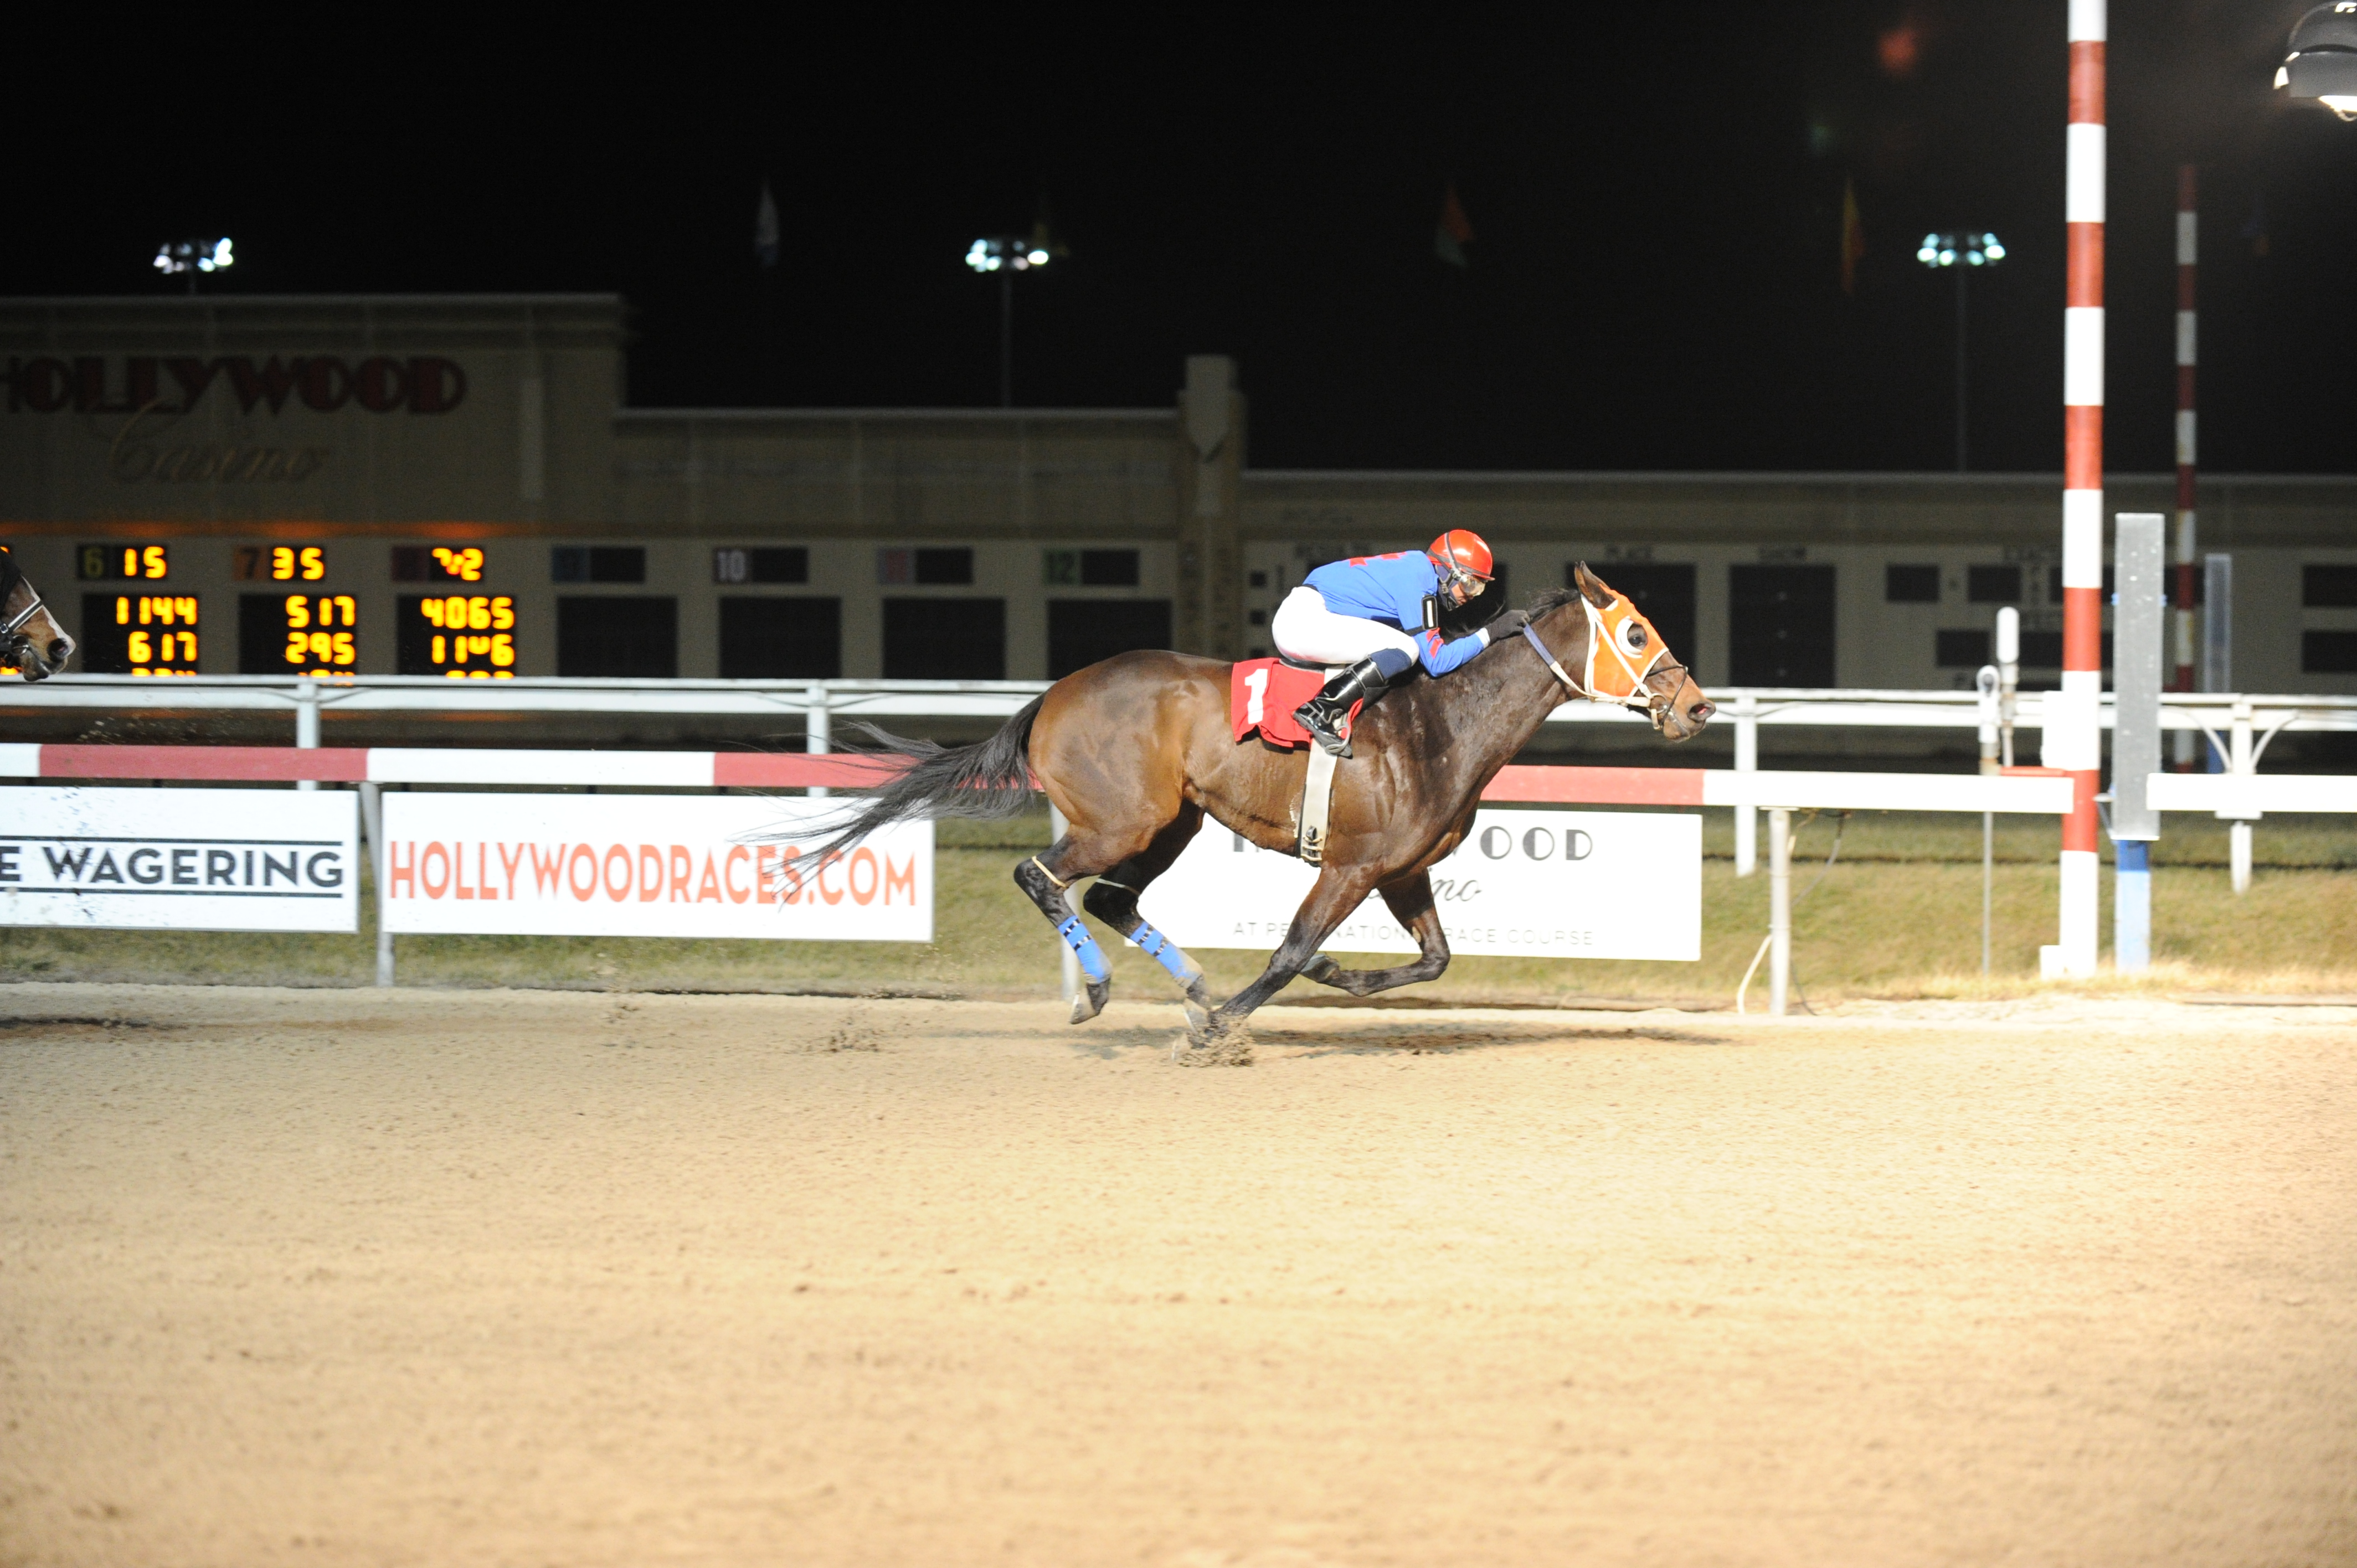 Bird Call, bred by the Lazy Lane Farms, went gate to wire in a Jan. 25th claiming race at Penn National. Photo courtesy of B&D Photography.